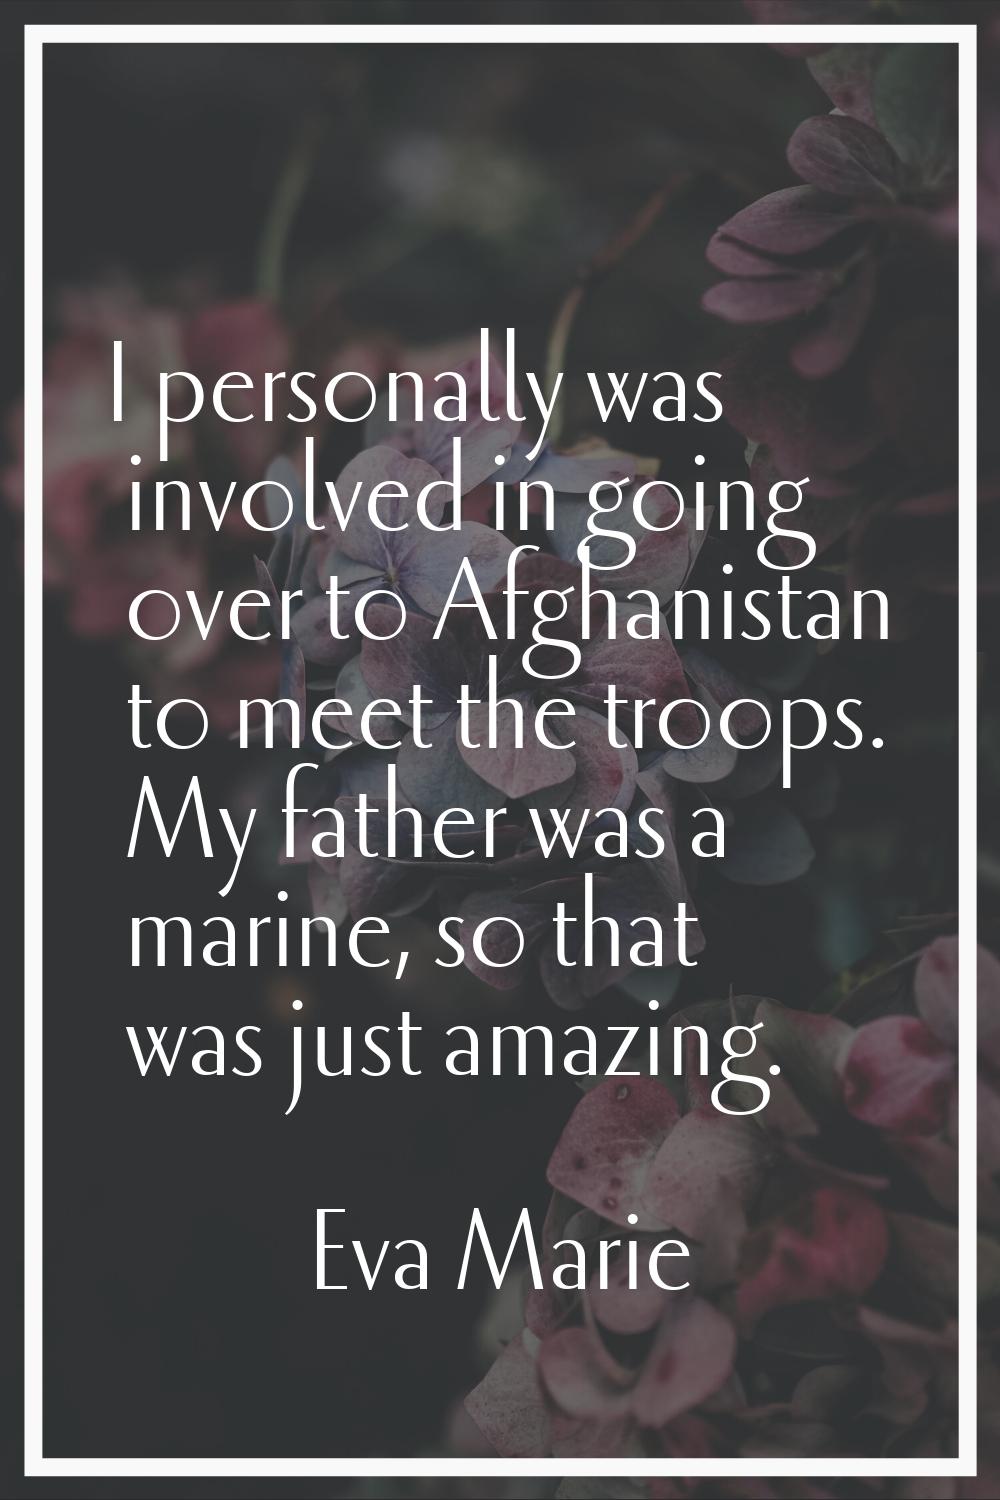 I personally was involved in going over to Afghanistan to meet the troops. My father was a marine, 